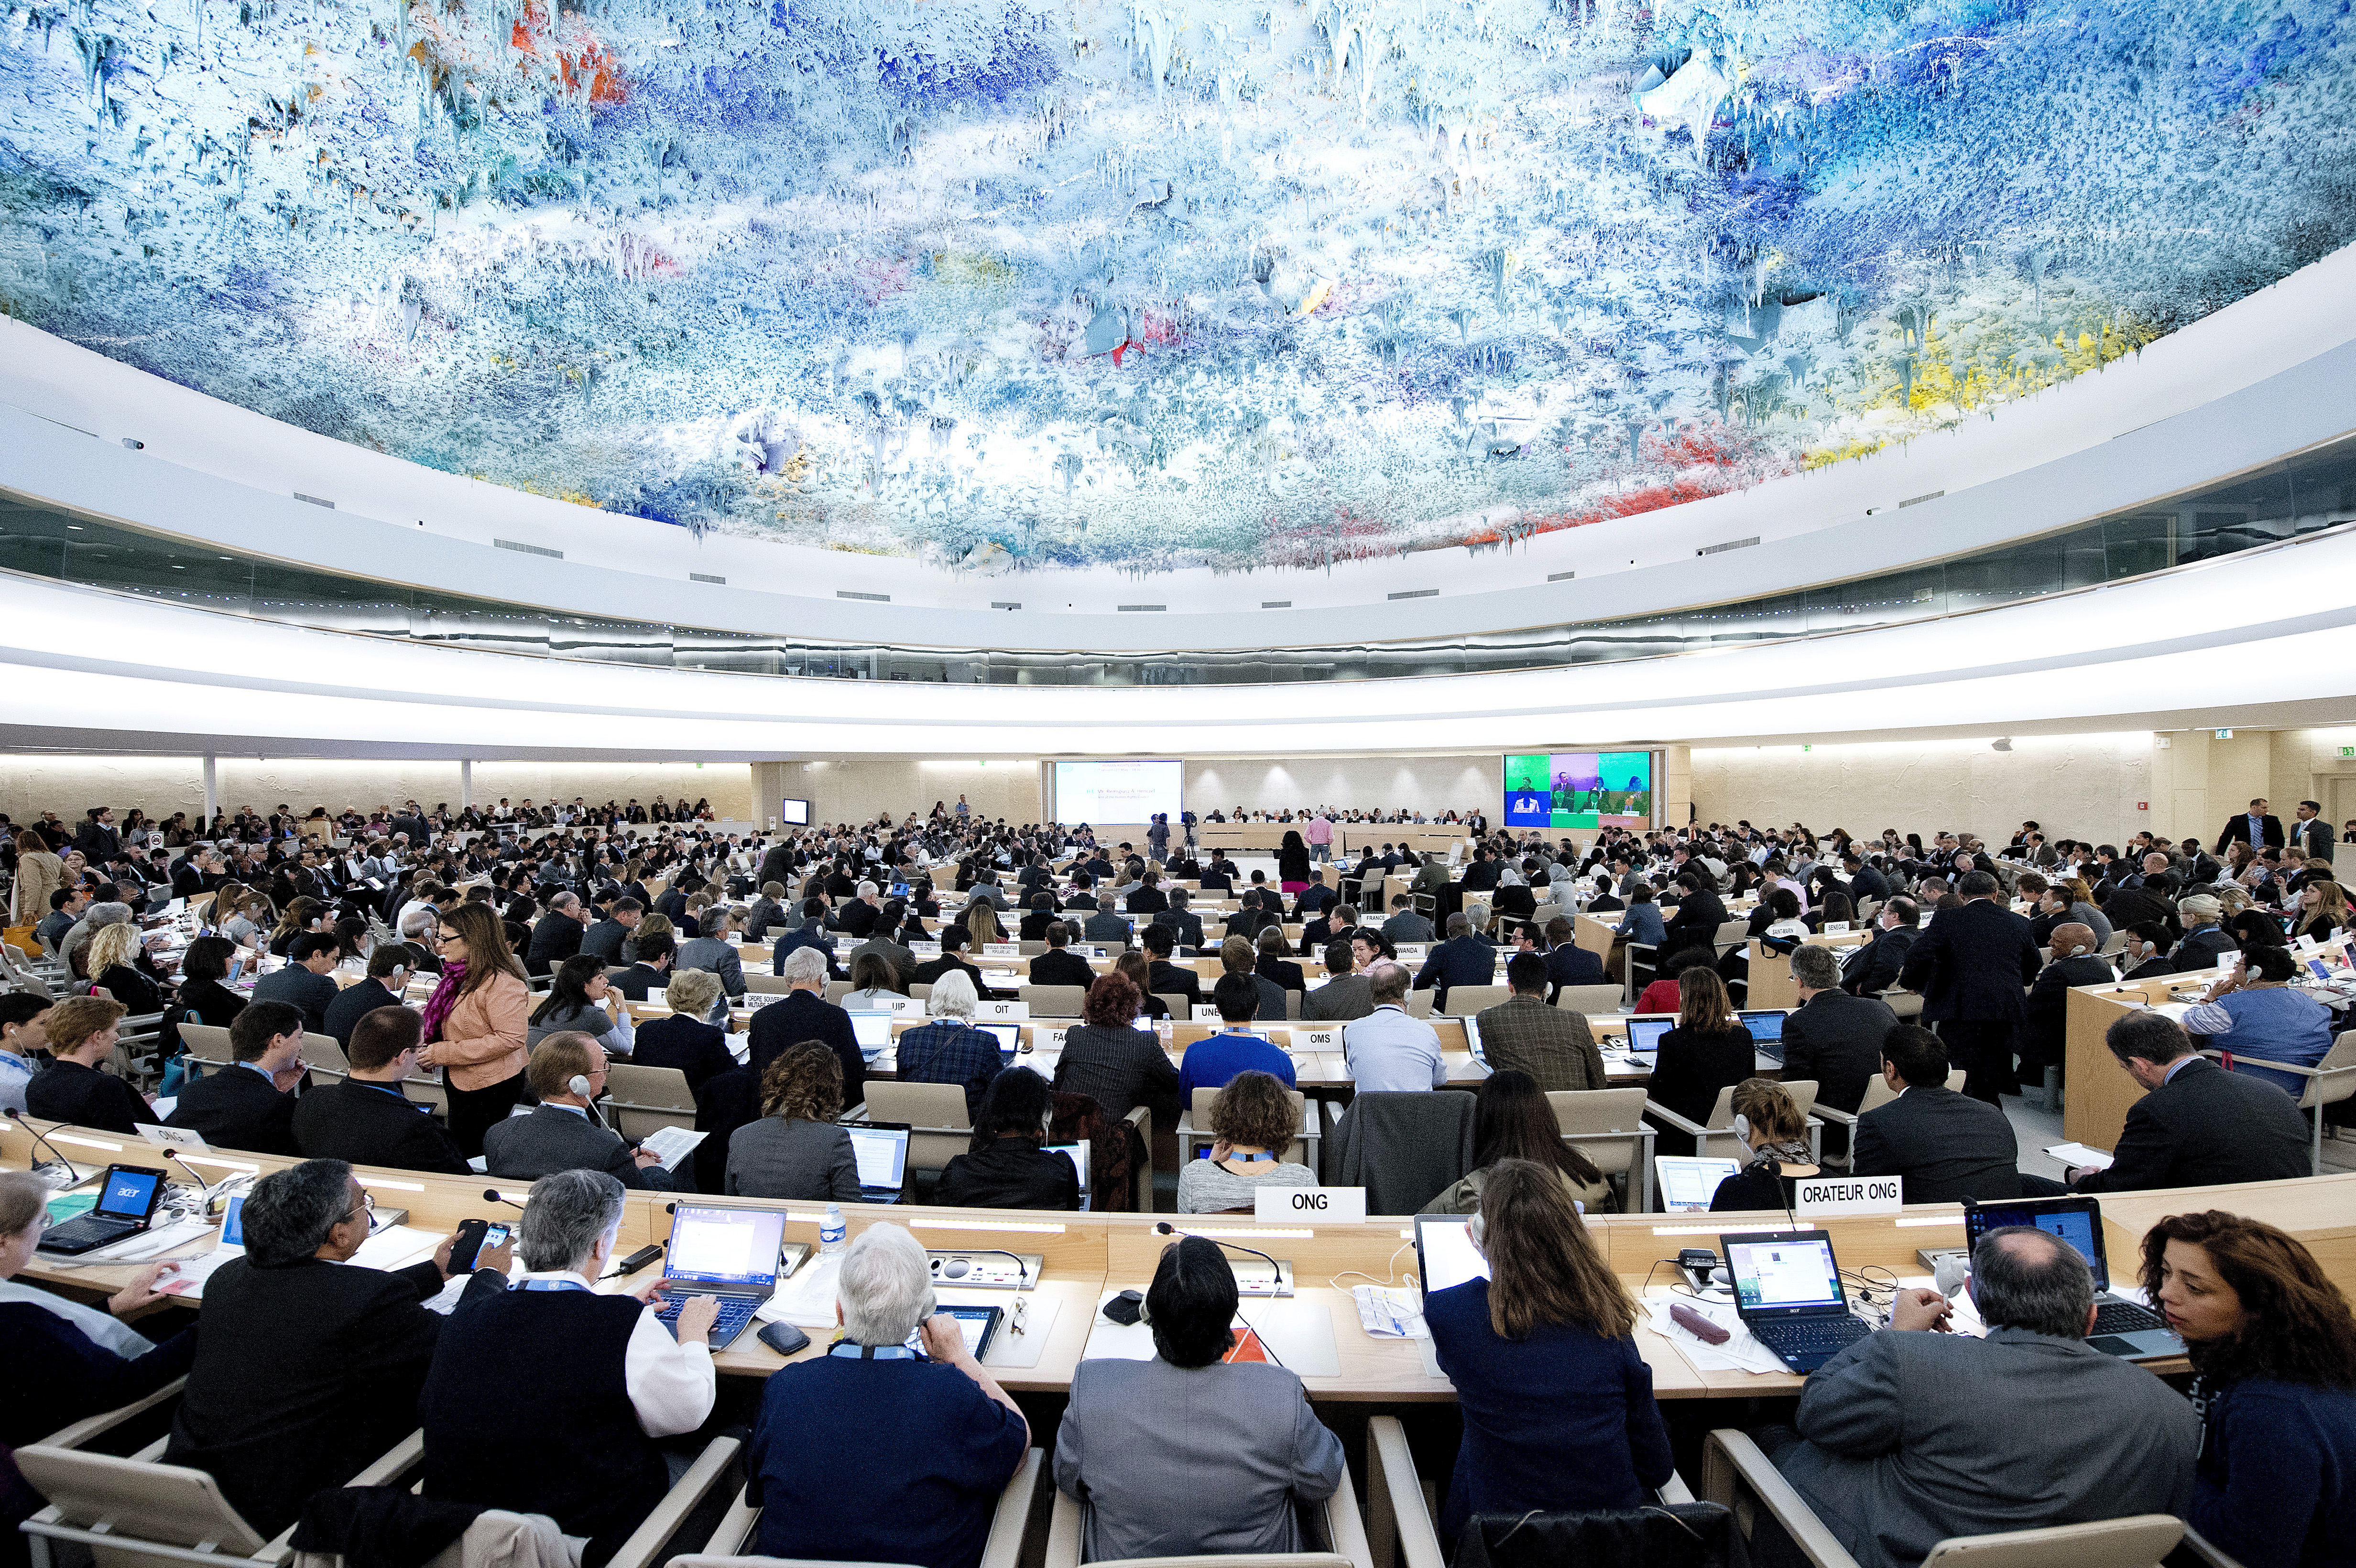 A general view during the 23th Session of the Human Rights Council. 27 May 2013. Photo by Jean-Marc Ferr